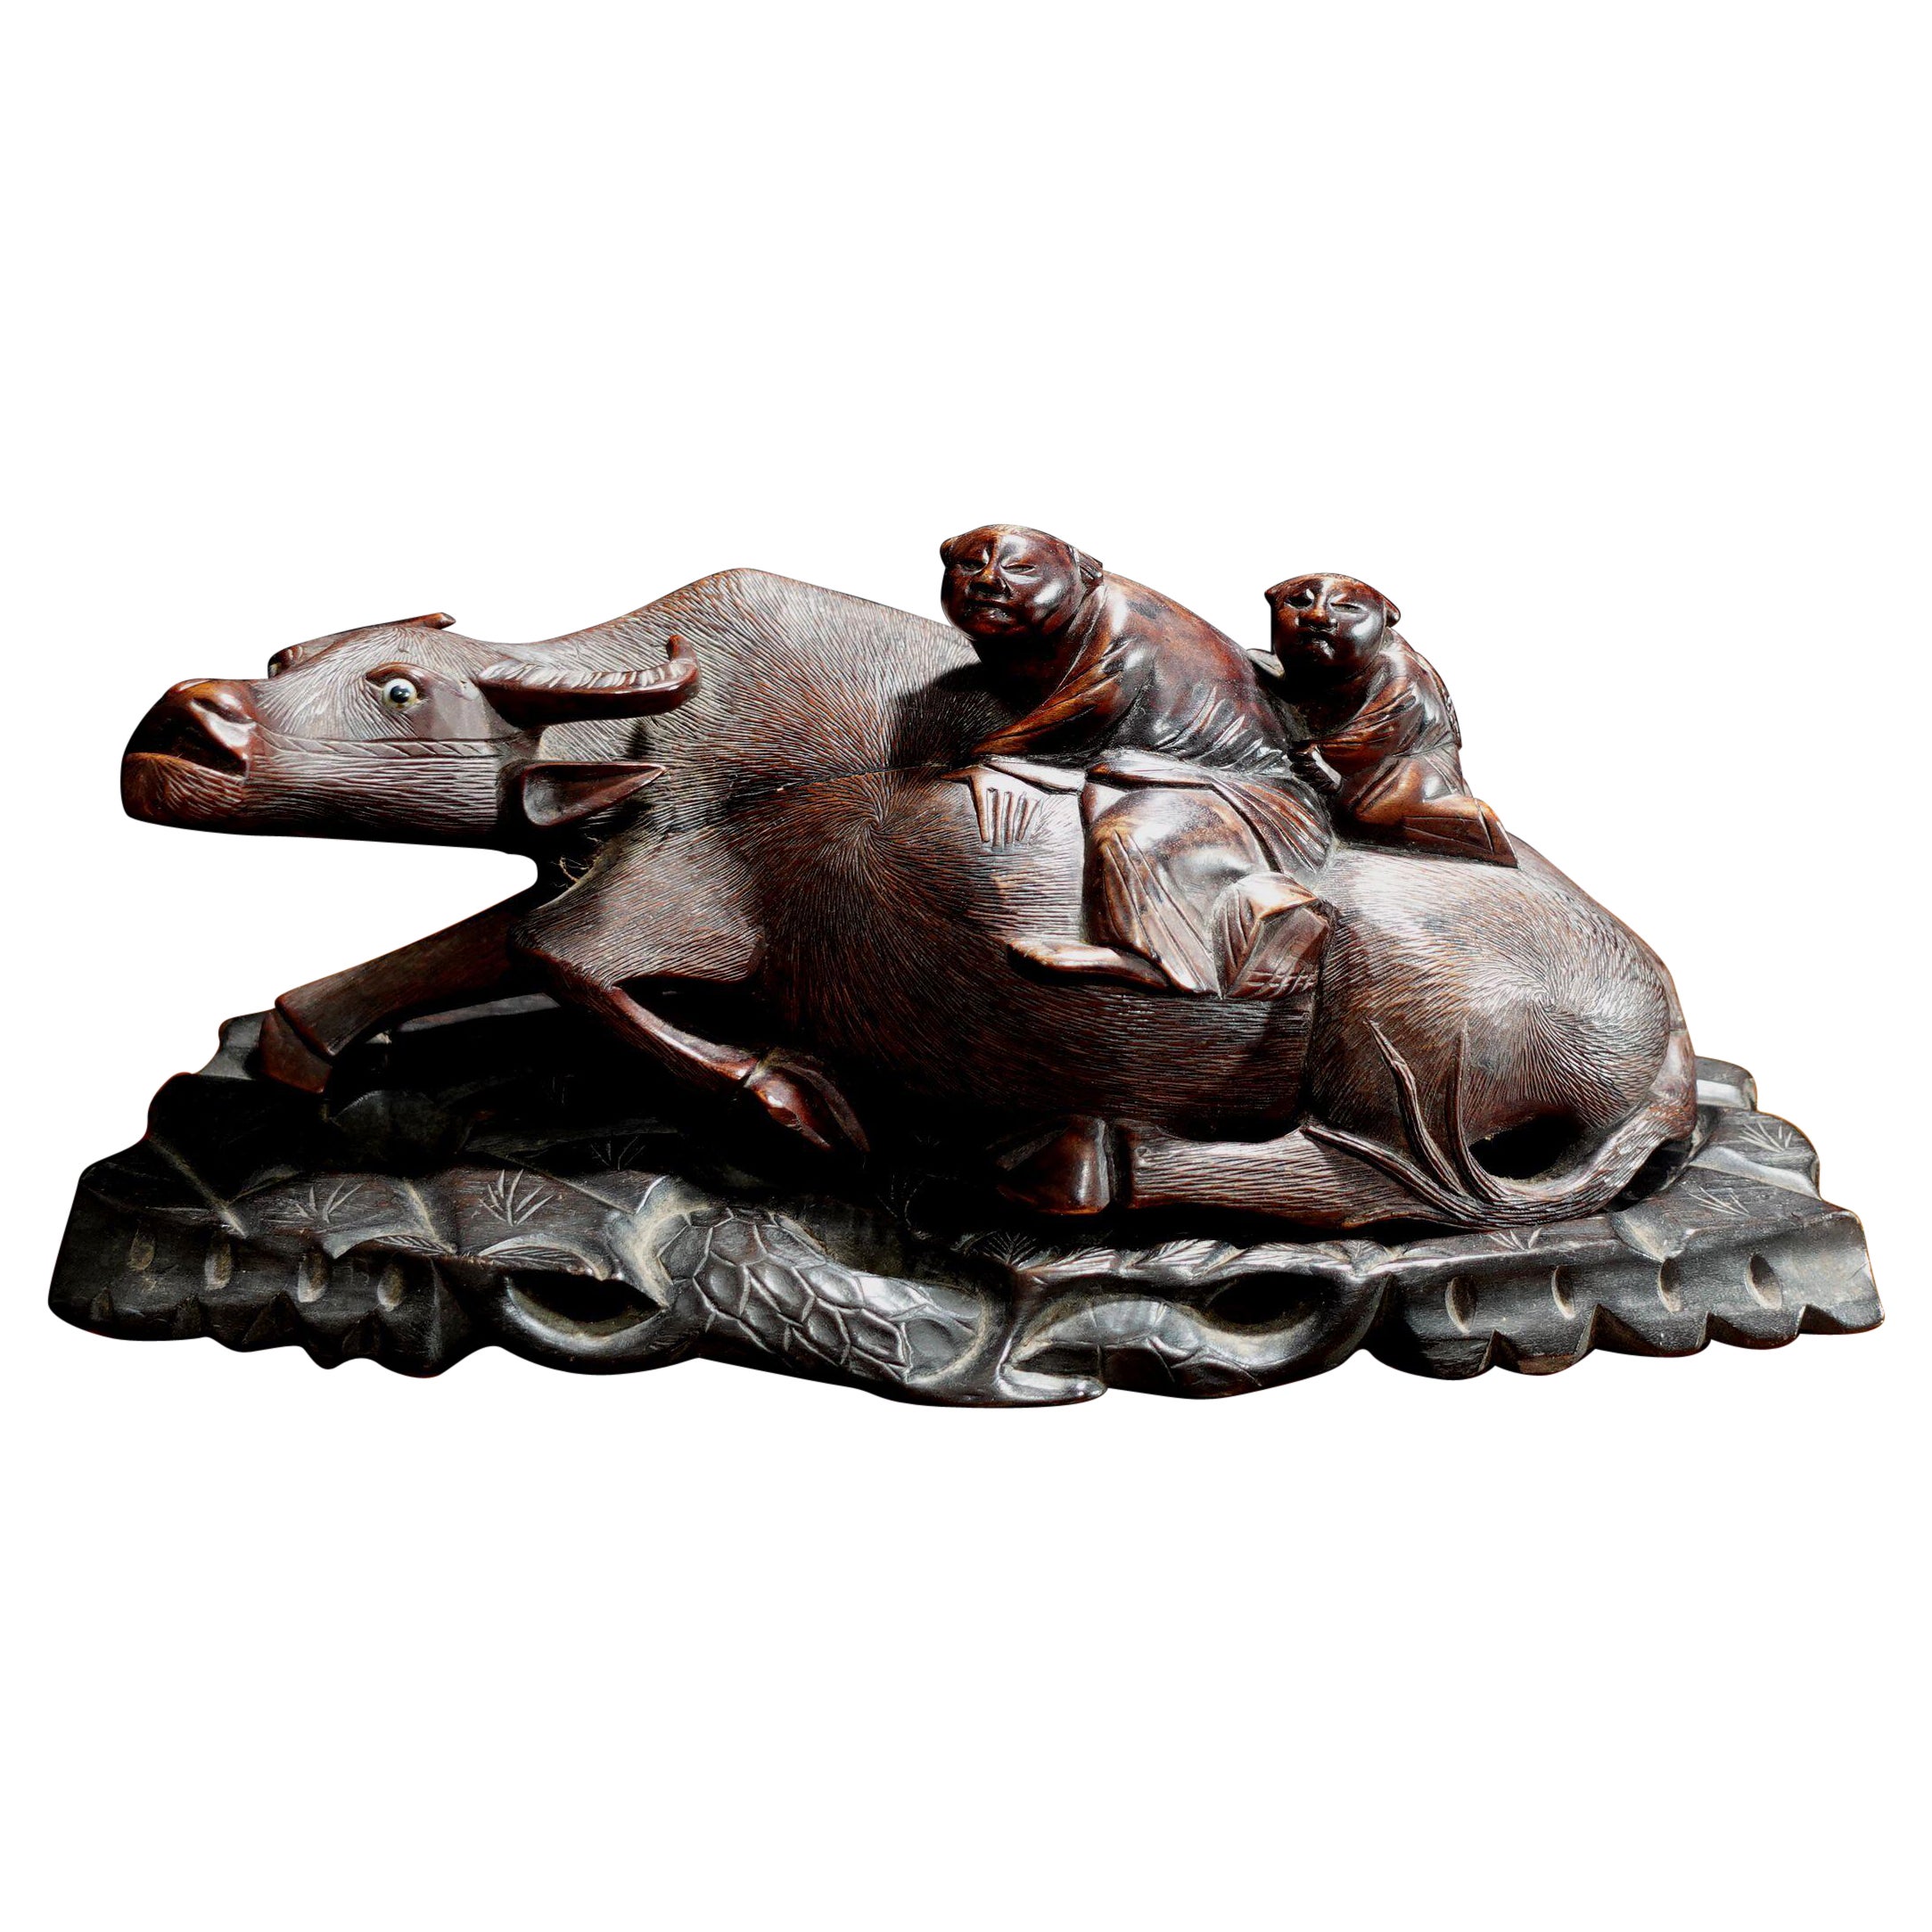 Japanese/Chinese Carved Buffalo and Boys on the Fitted Base